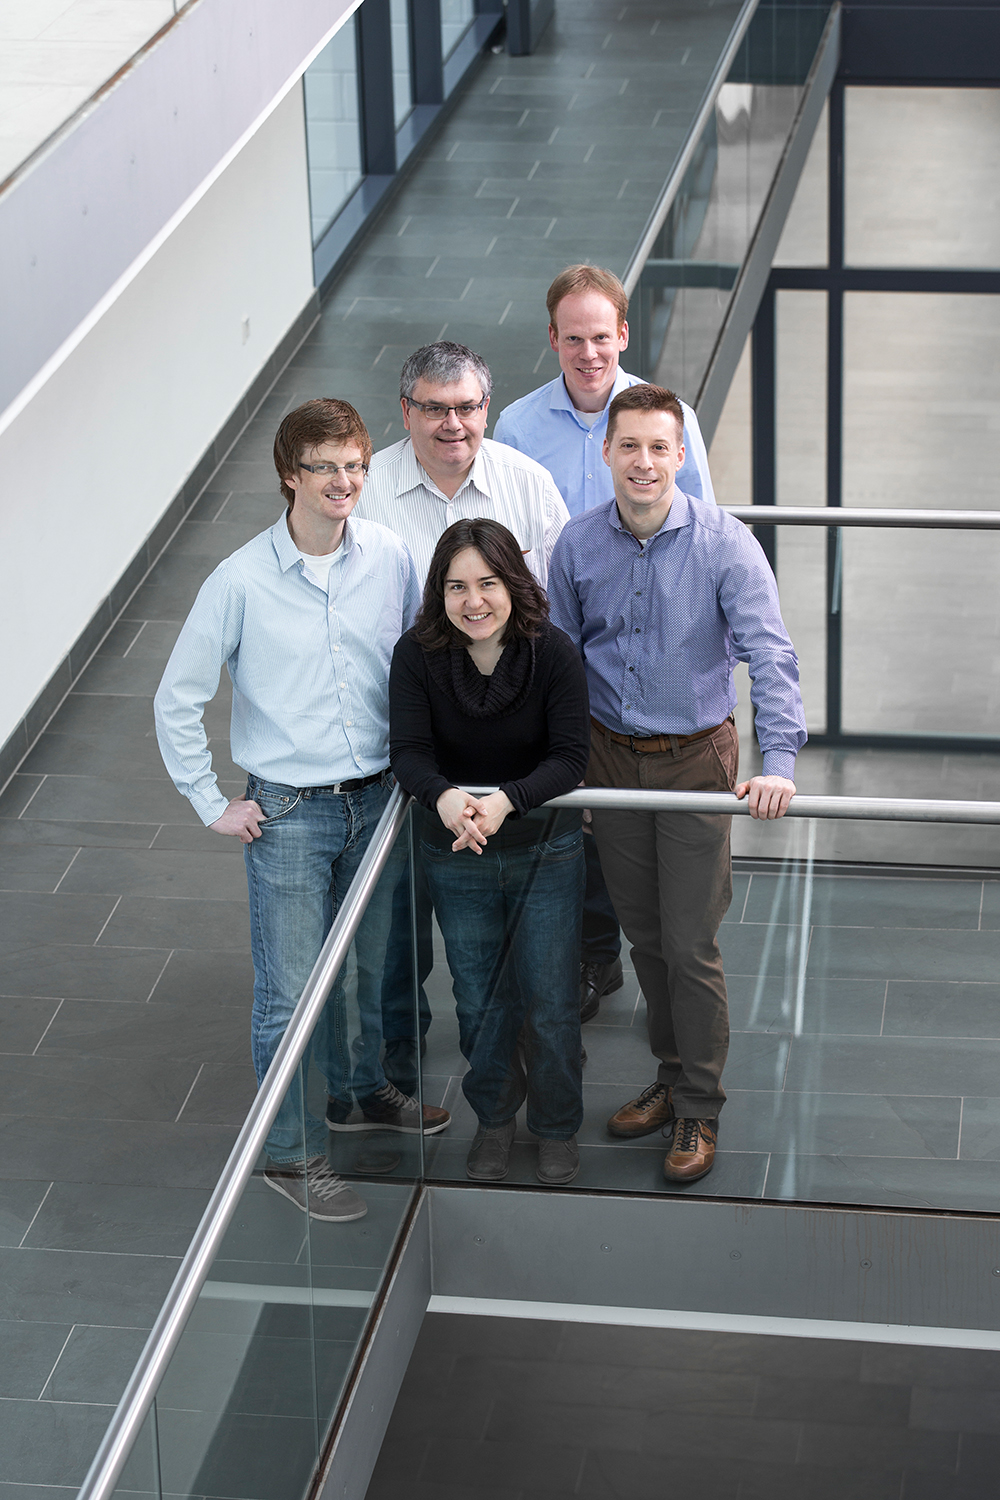 By developing an interactive and easy-to-use software, Dr. Philipp Süss, Prof. Dr. Karl-Heinz Küfer, Dr. Katrin Teichert, Dr. Michael Bortz and Dr. Alexander Scherrer to improve the healing chances of cancer patients.